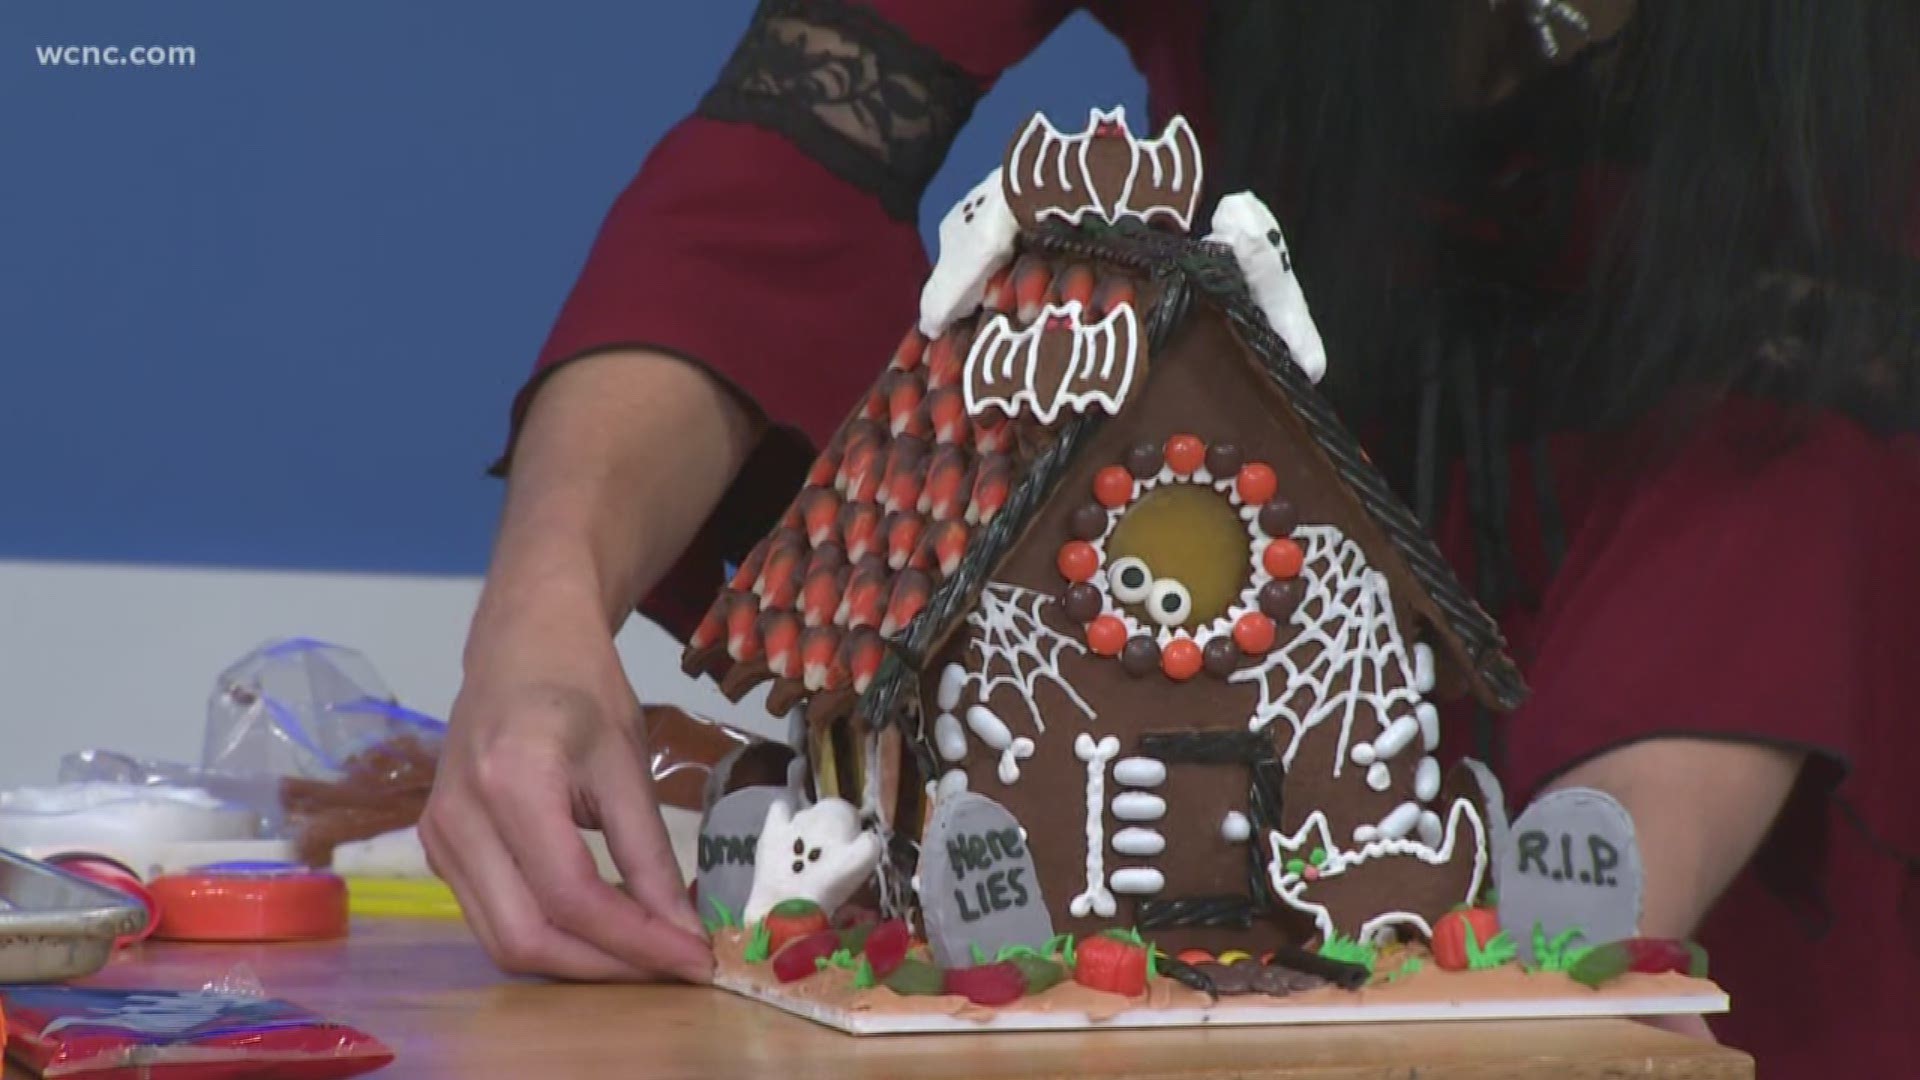 A homemade, edible gingerbread house – but for Halloween!